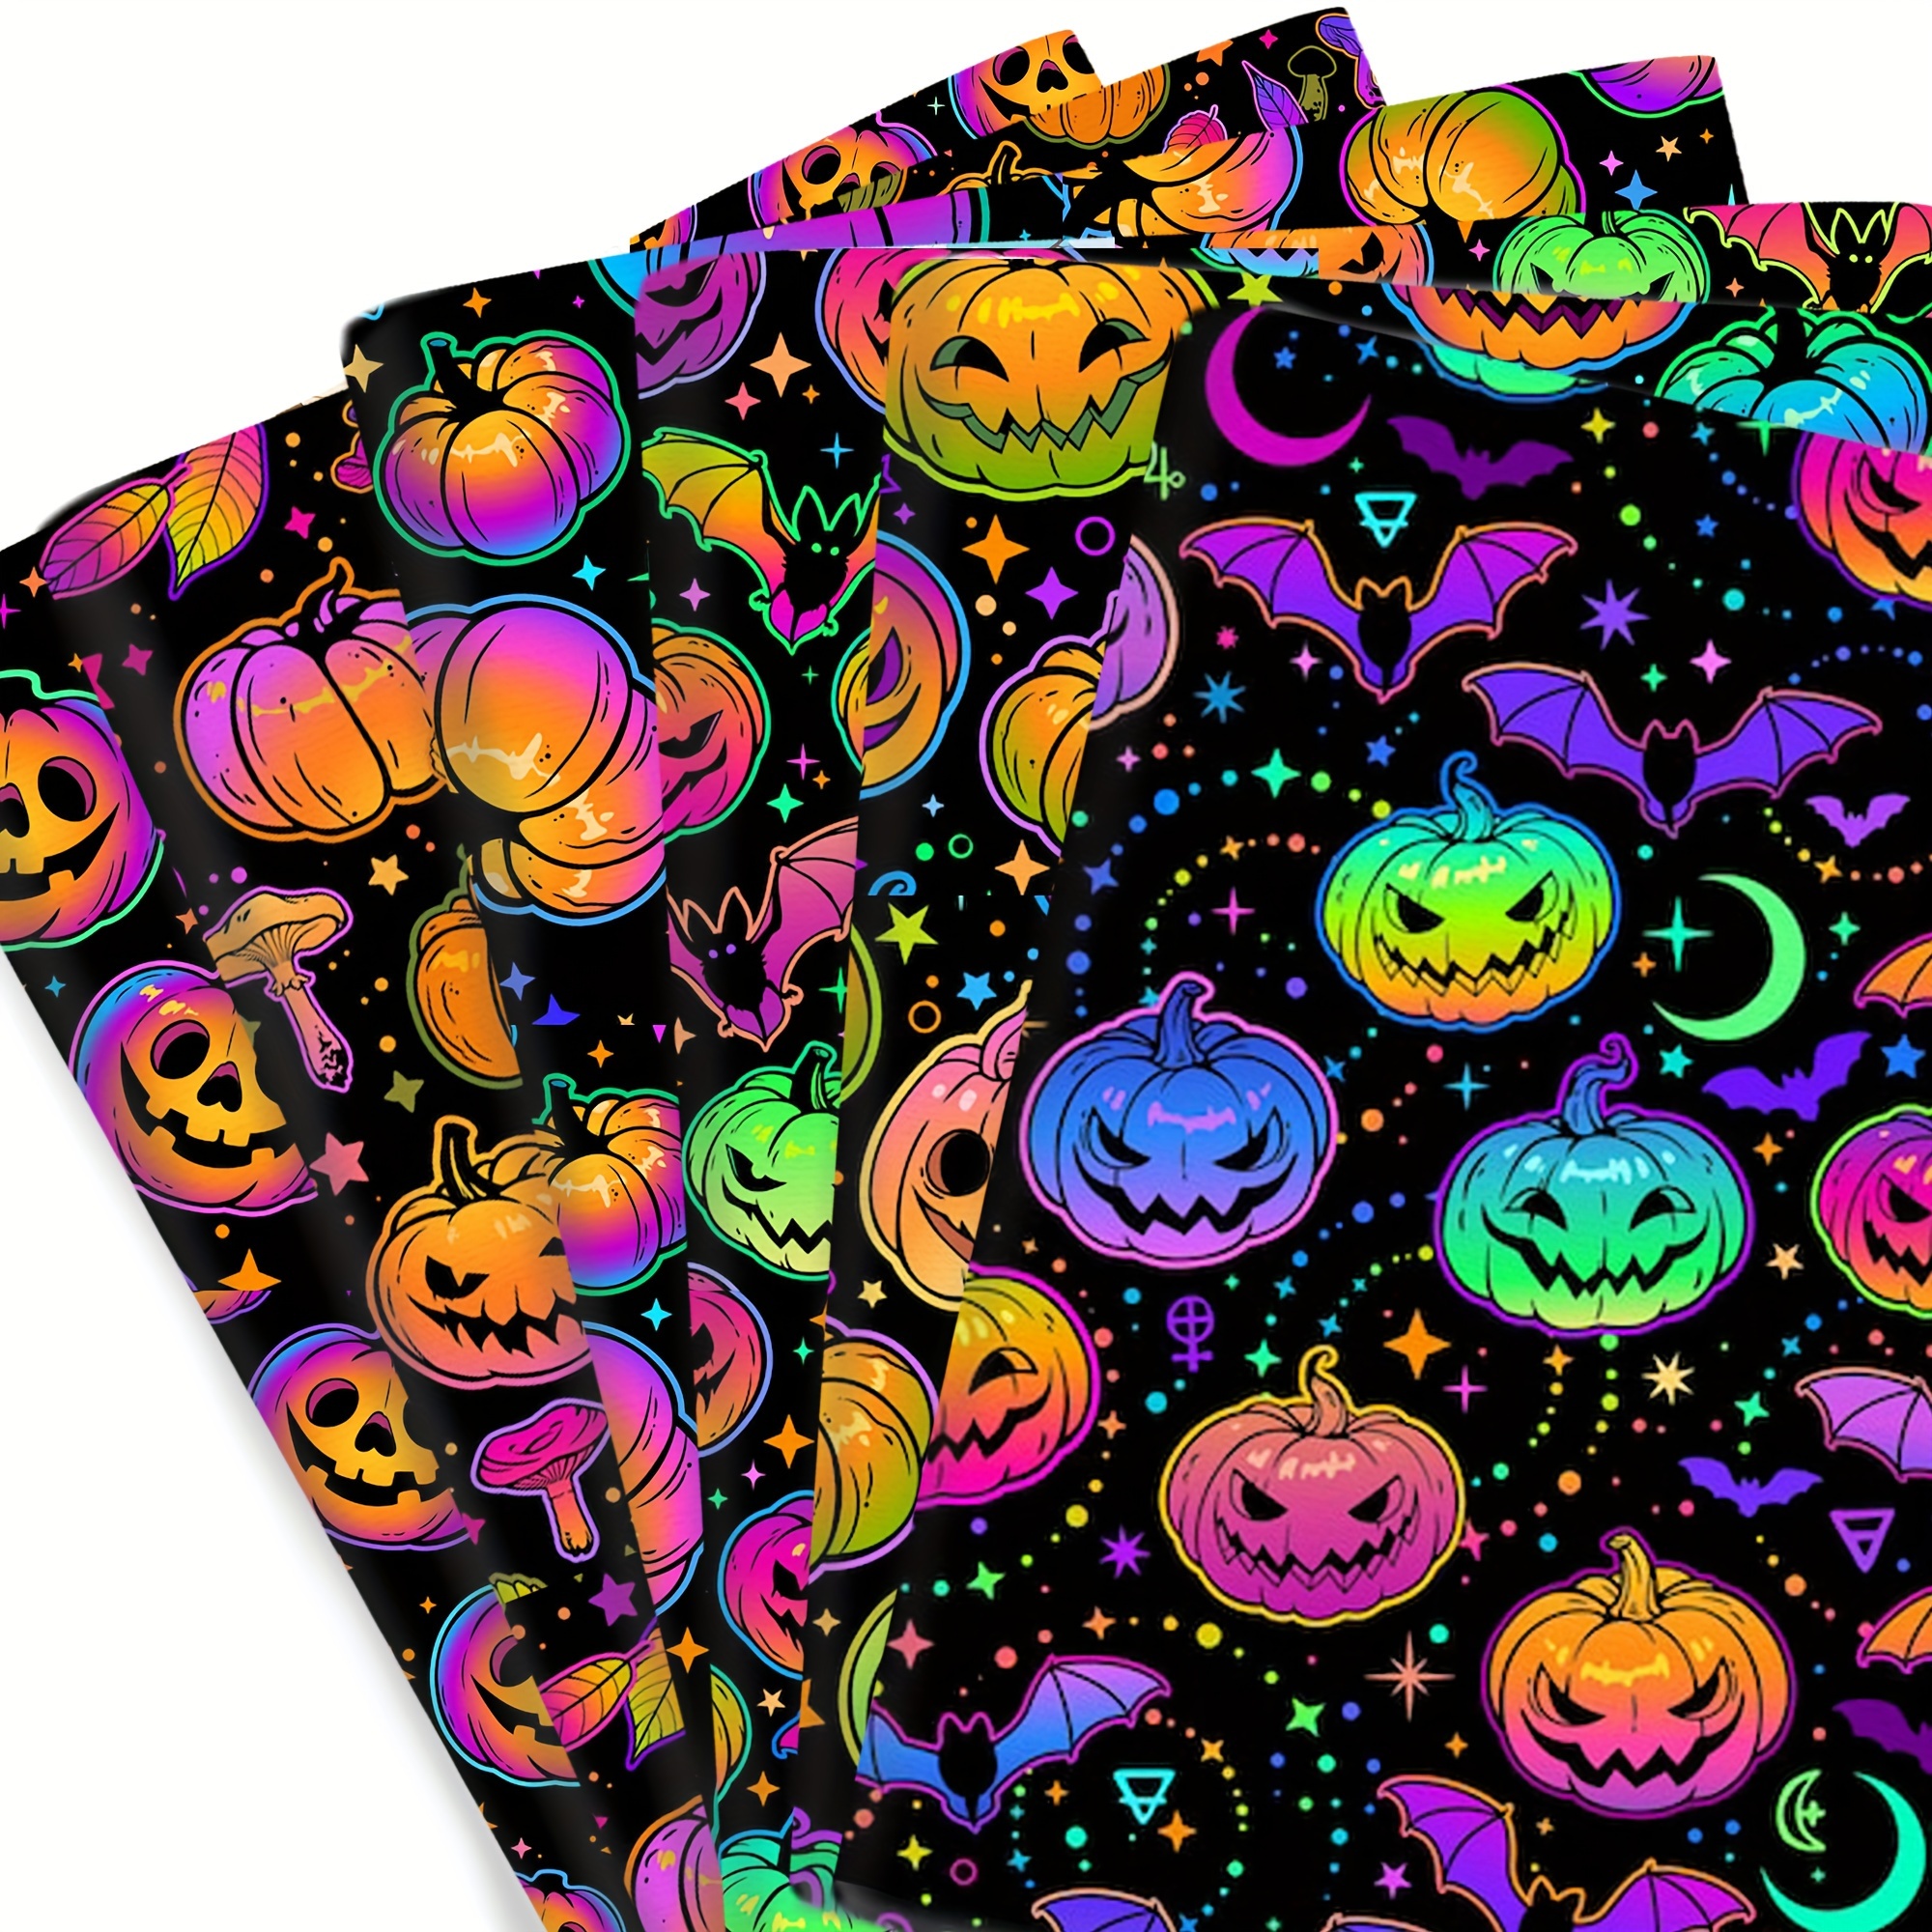 

Spooky Halloween Quilting Fabric - Moon, Pumpkin, Bat Designs In Glossy Purple, Polyester Cotton Blend, 57x19.68inch